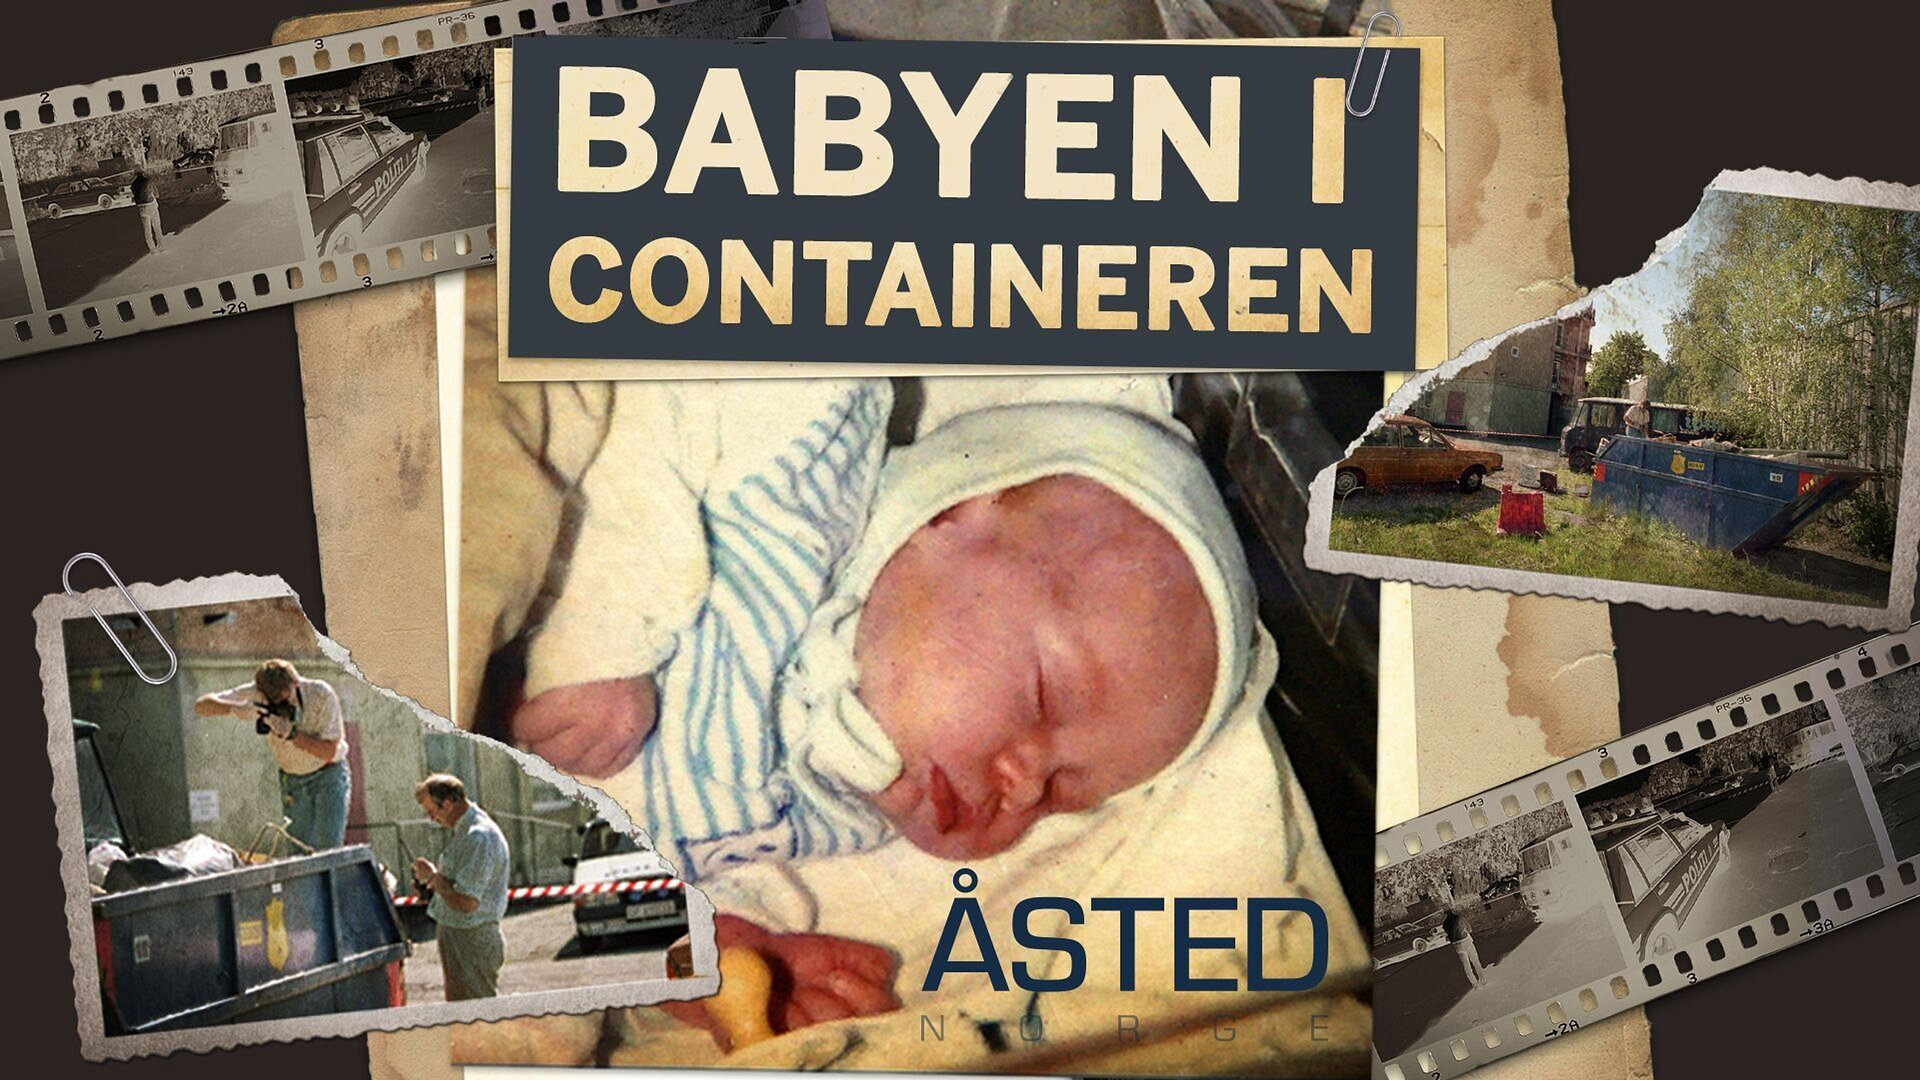 Åsted Norge: Babyen i containeren